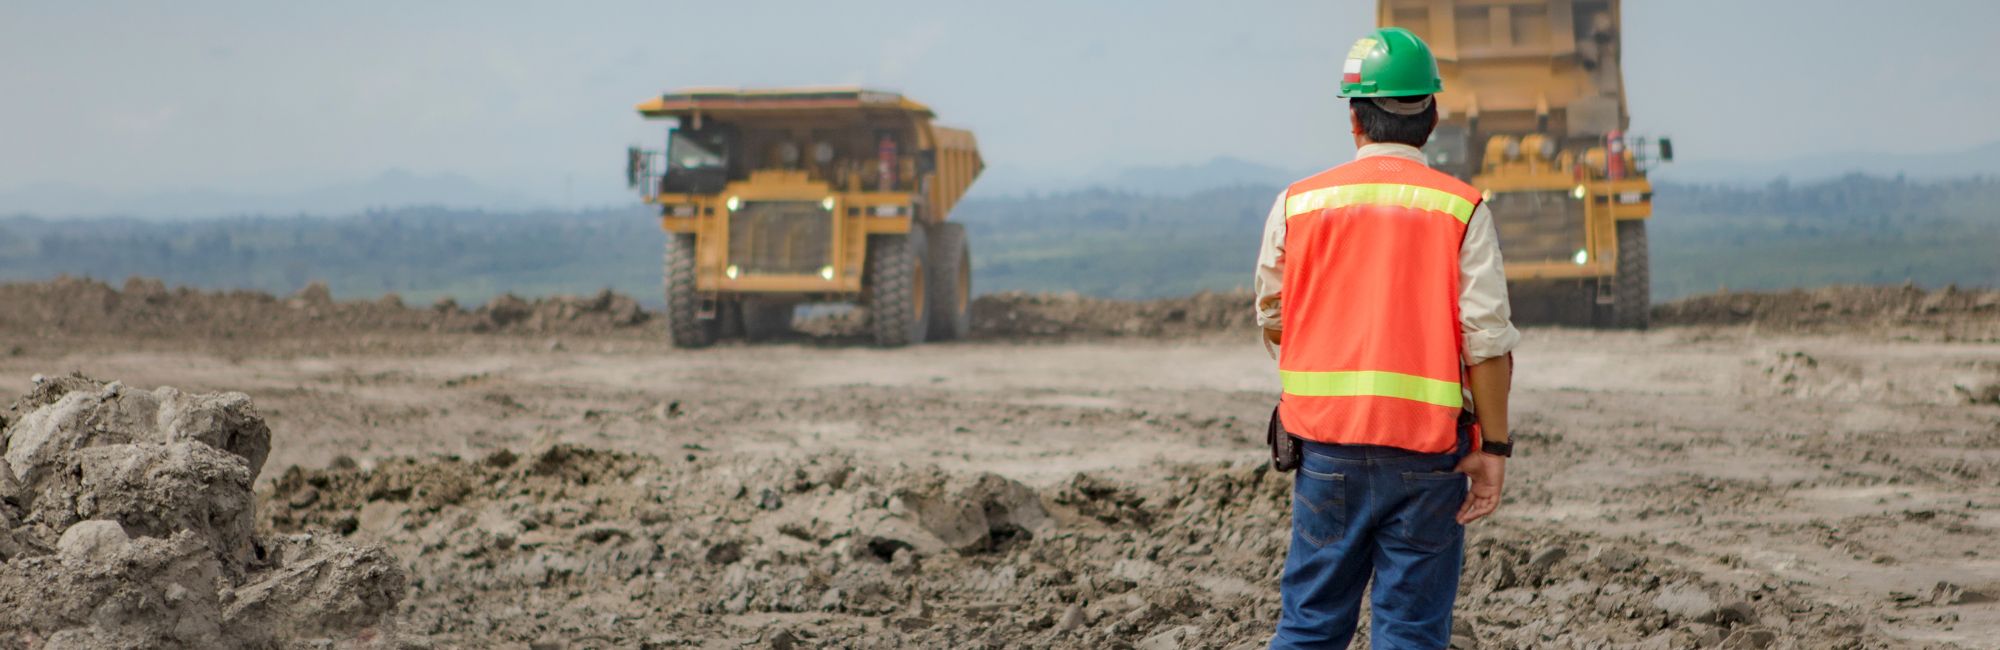 Repositioning The Mining Industry Strategies to Attract Talent